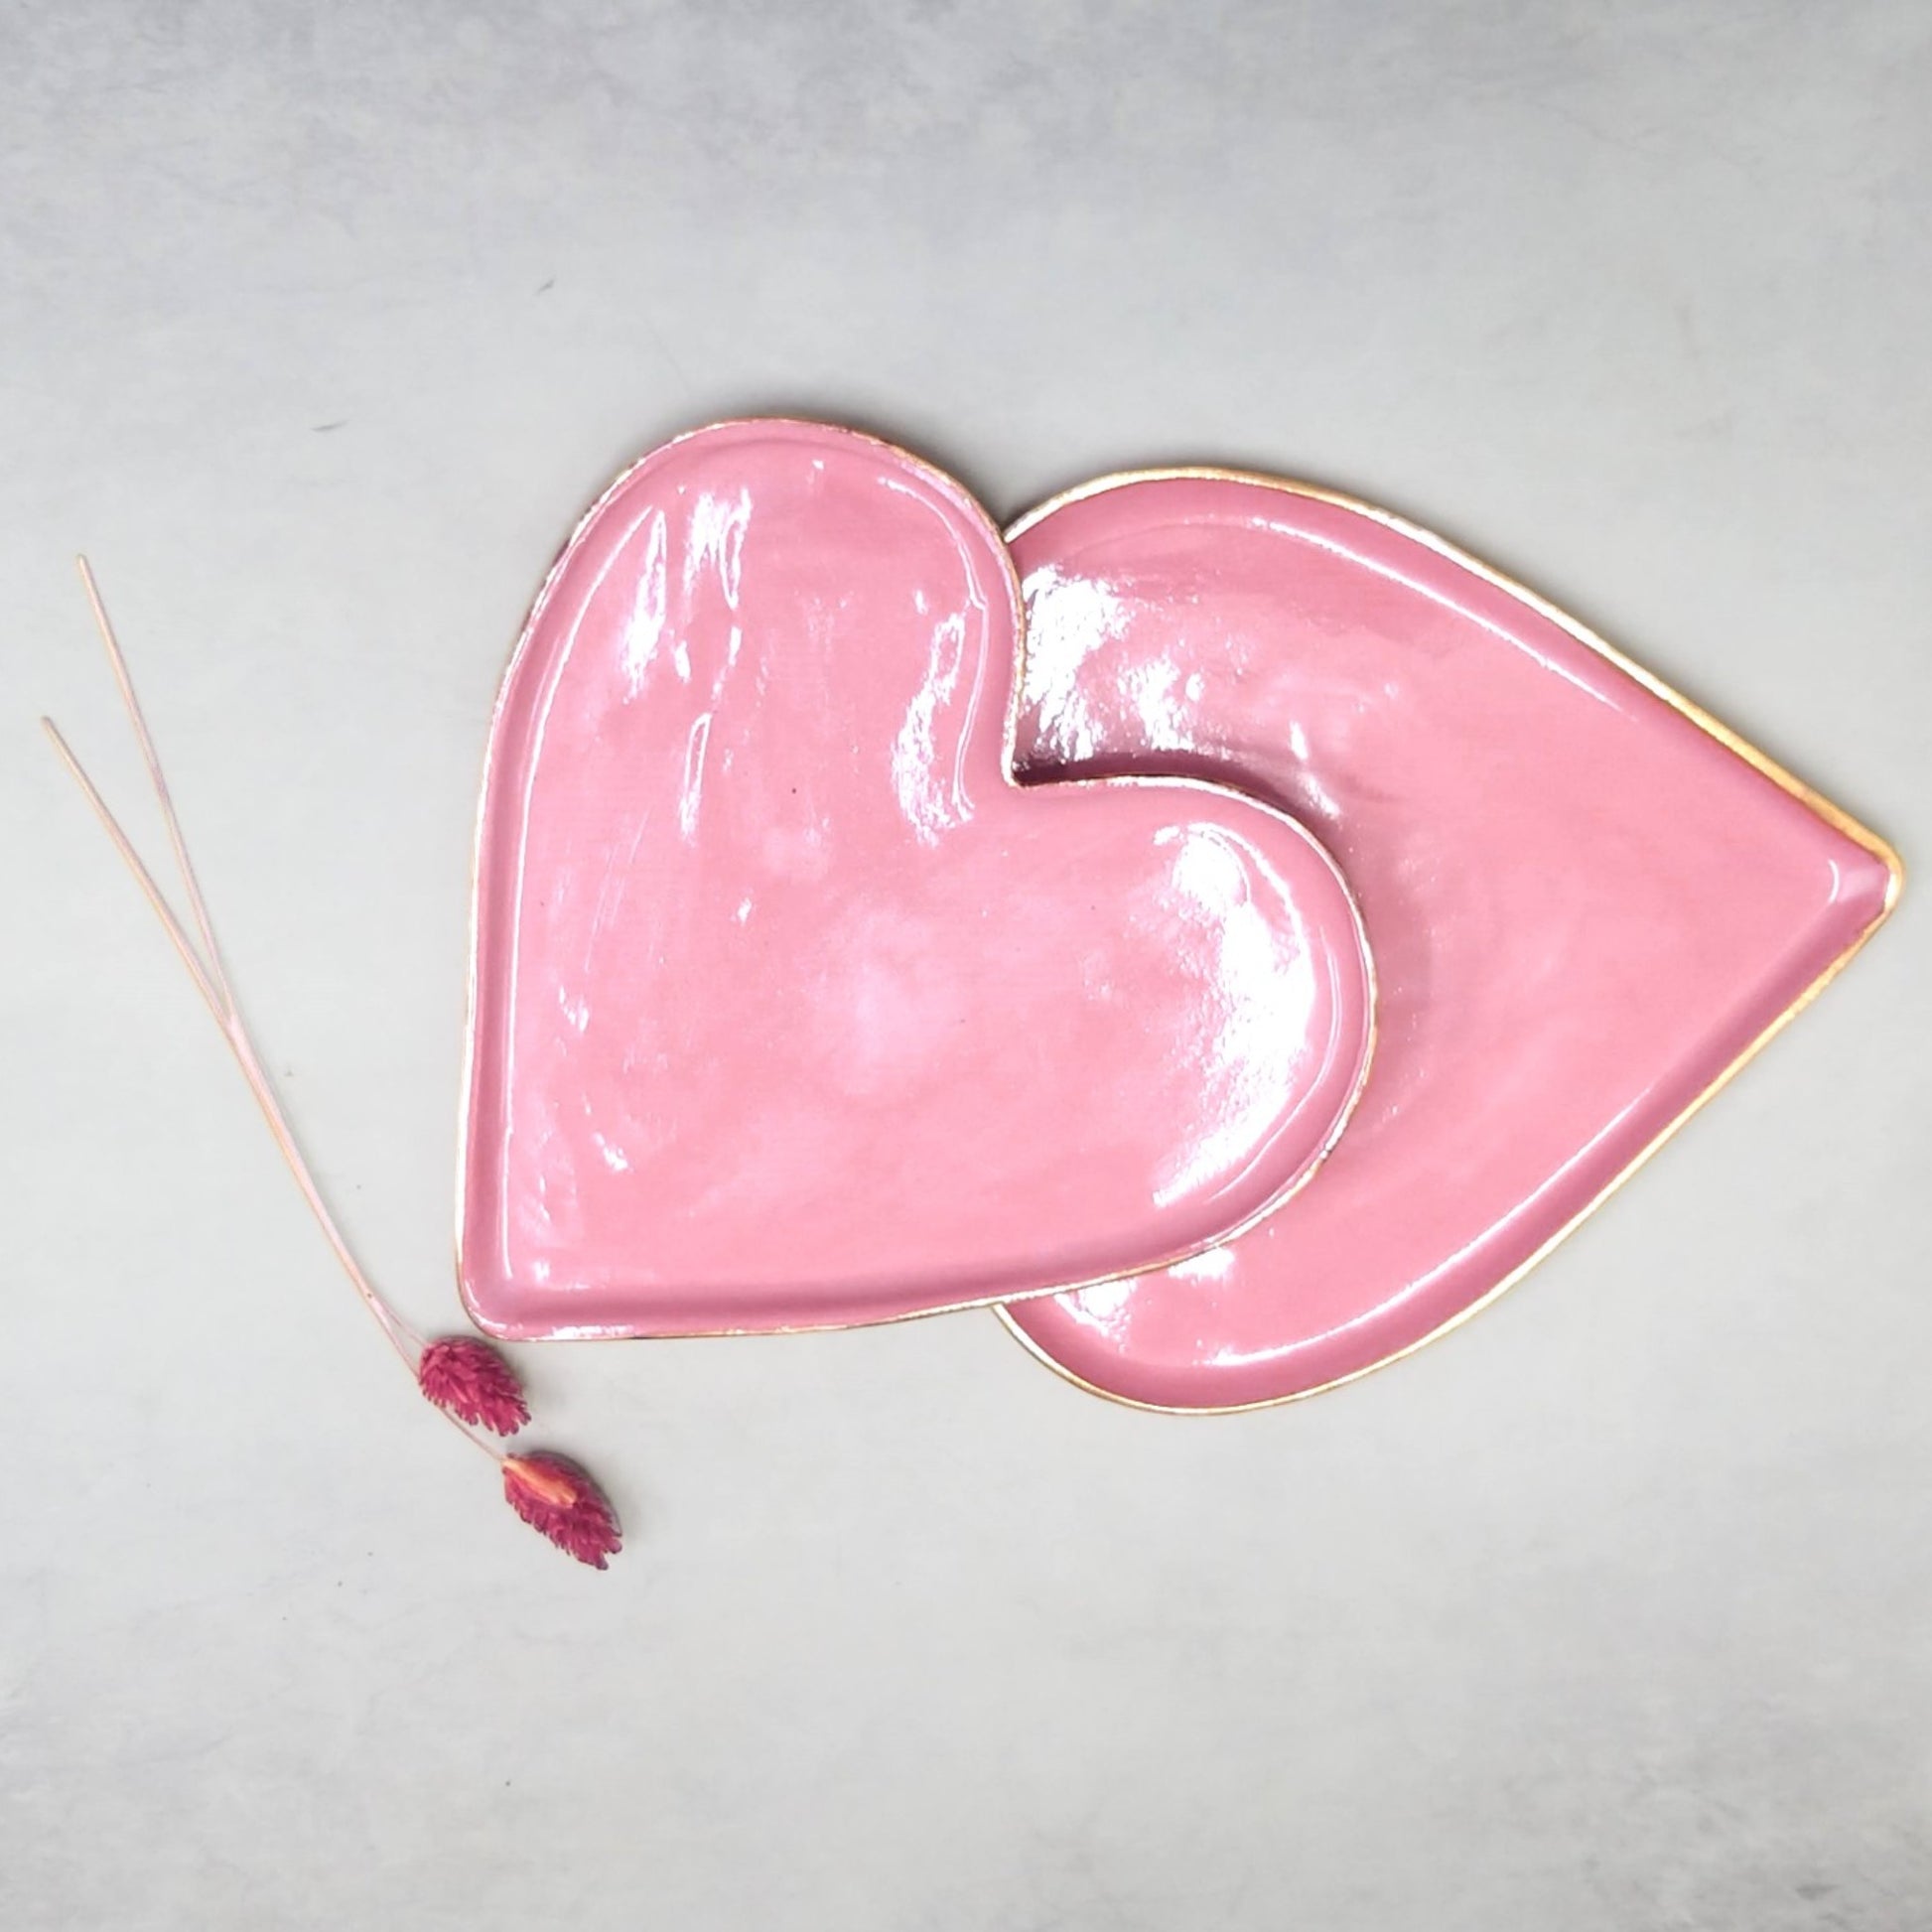 Two heart shape ceramic plates colored pink and gold